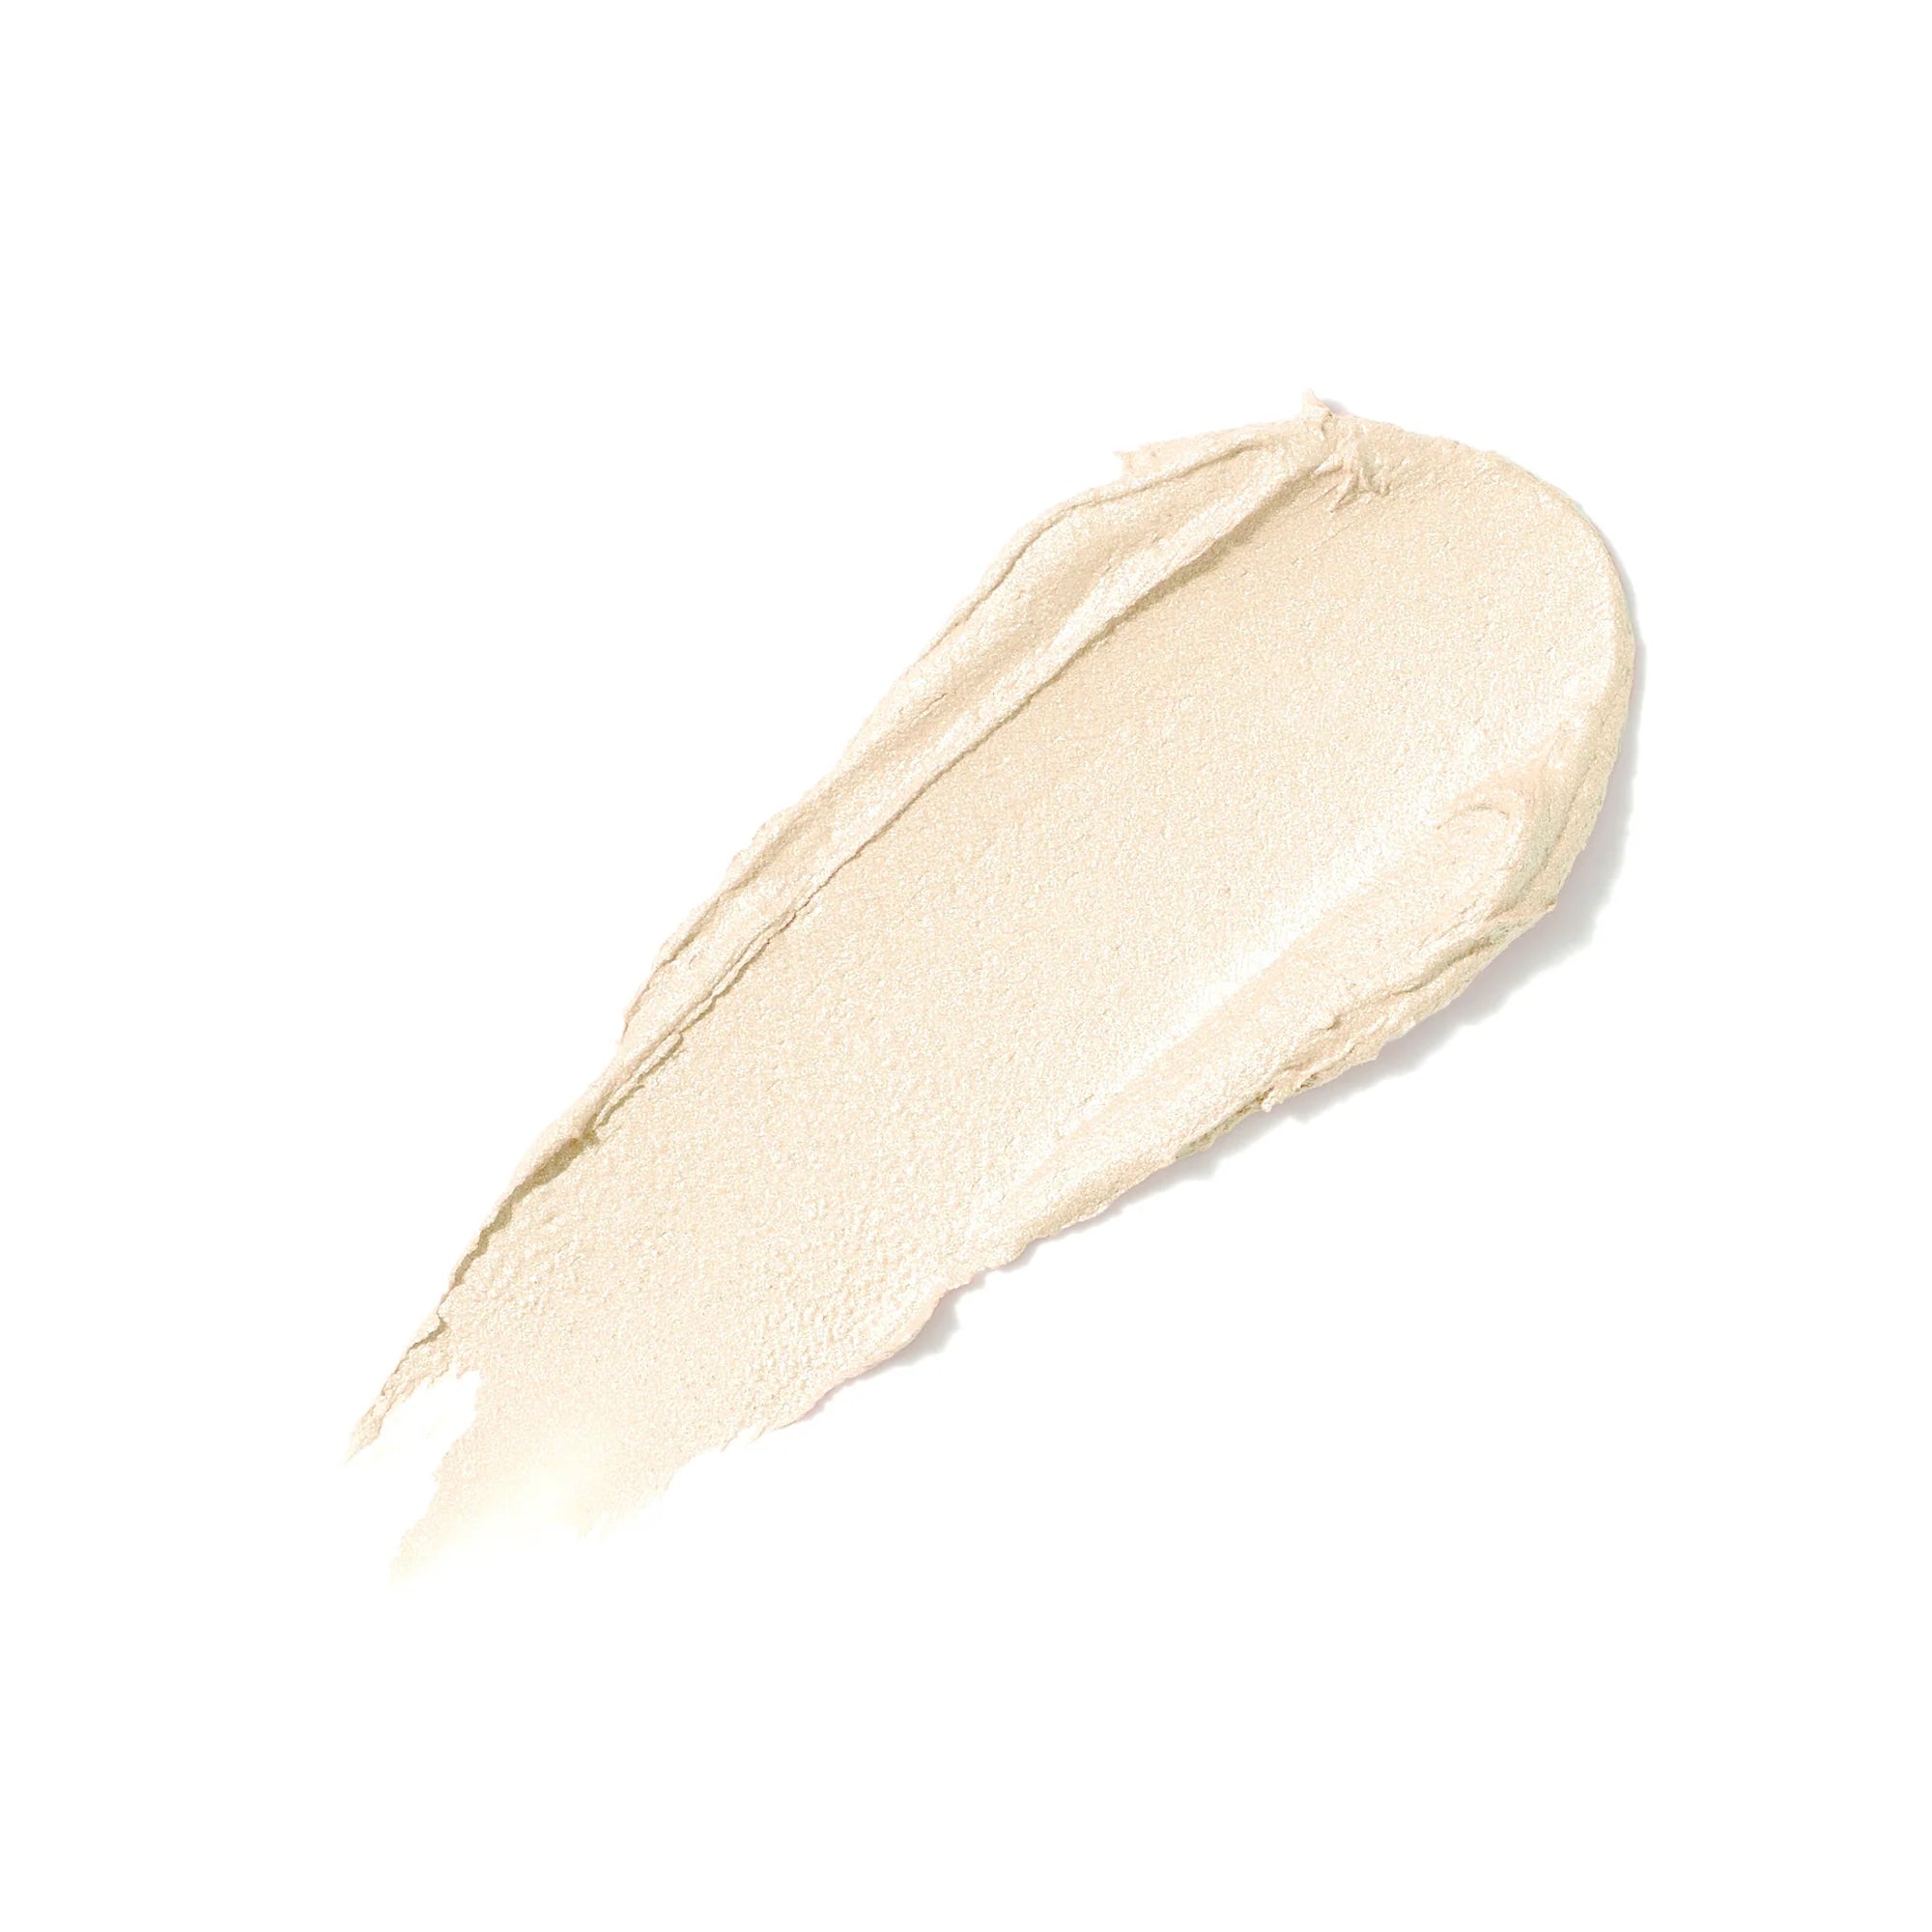 Jane Iredale's Glow Time Highlighter Stick - shade Solstice - iridescent champagne for fair to dark skin tones